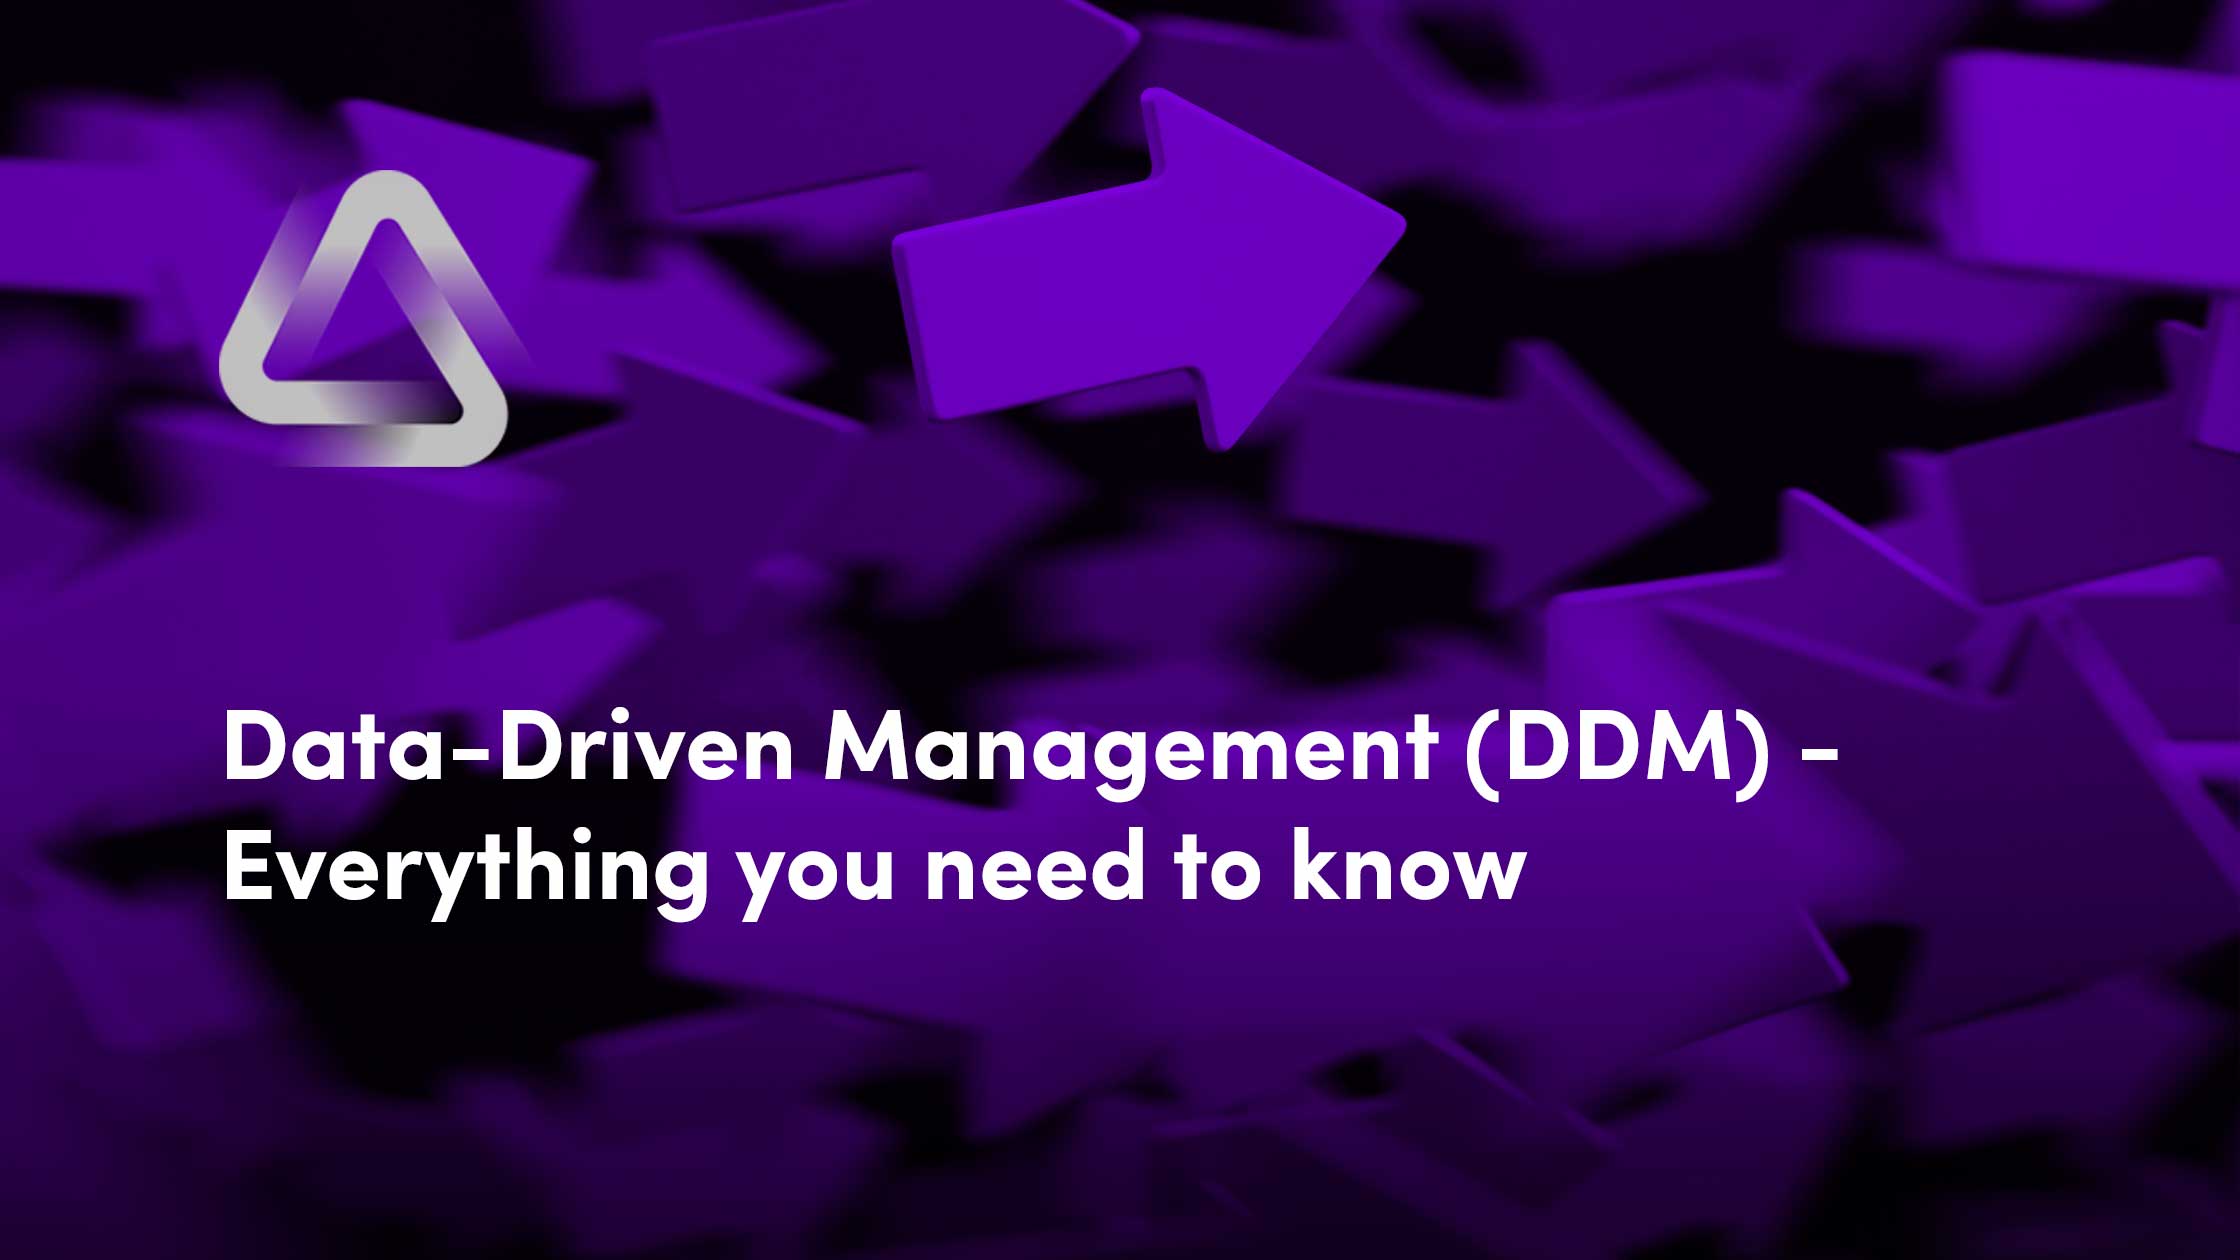 Data-Driven Management (DDM) - Everything you need to know about data-driven business